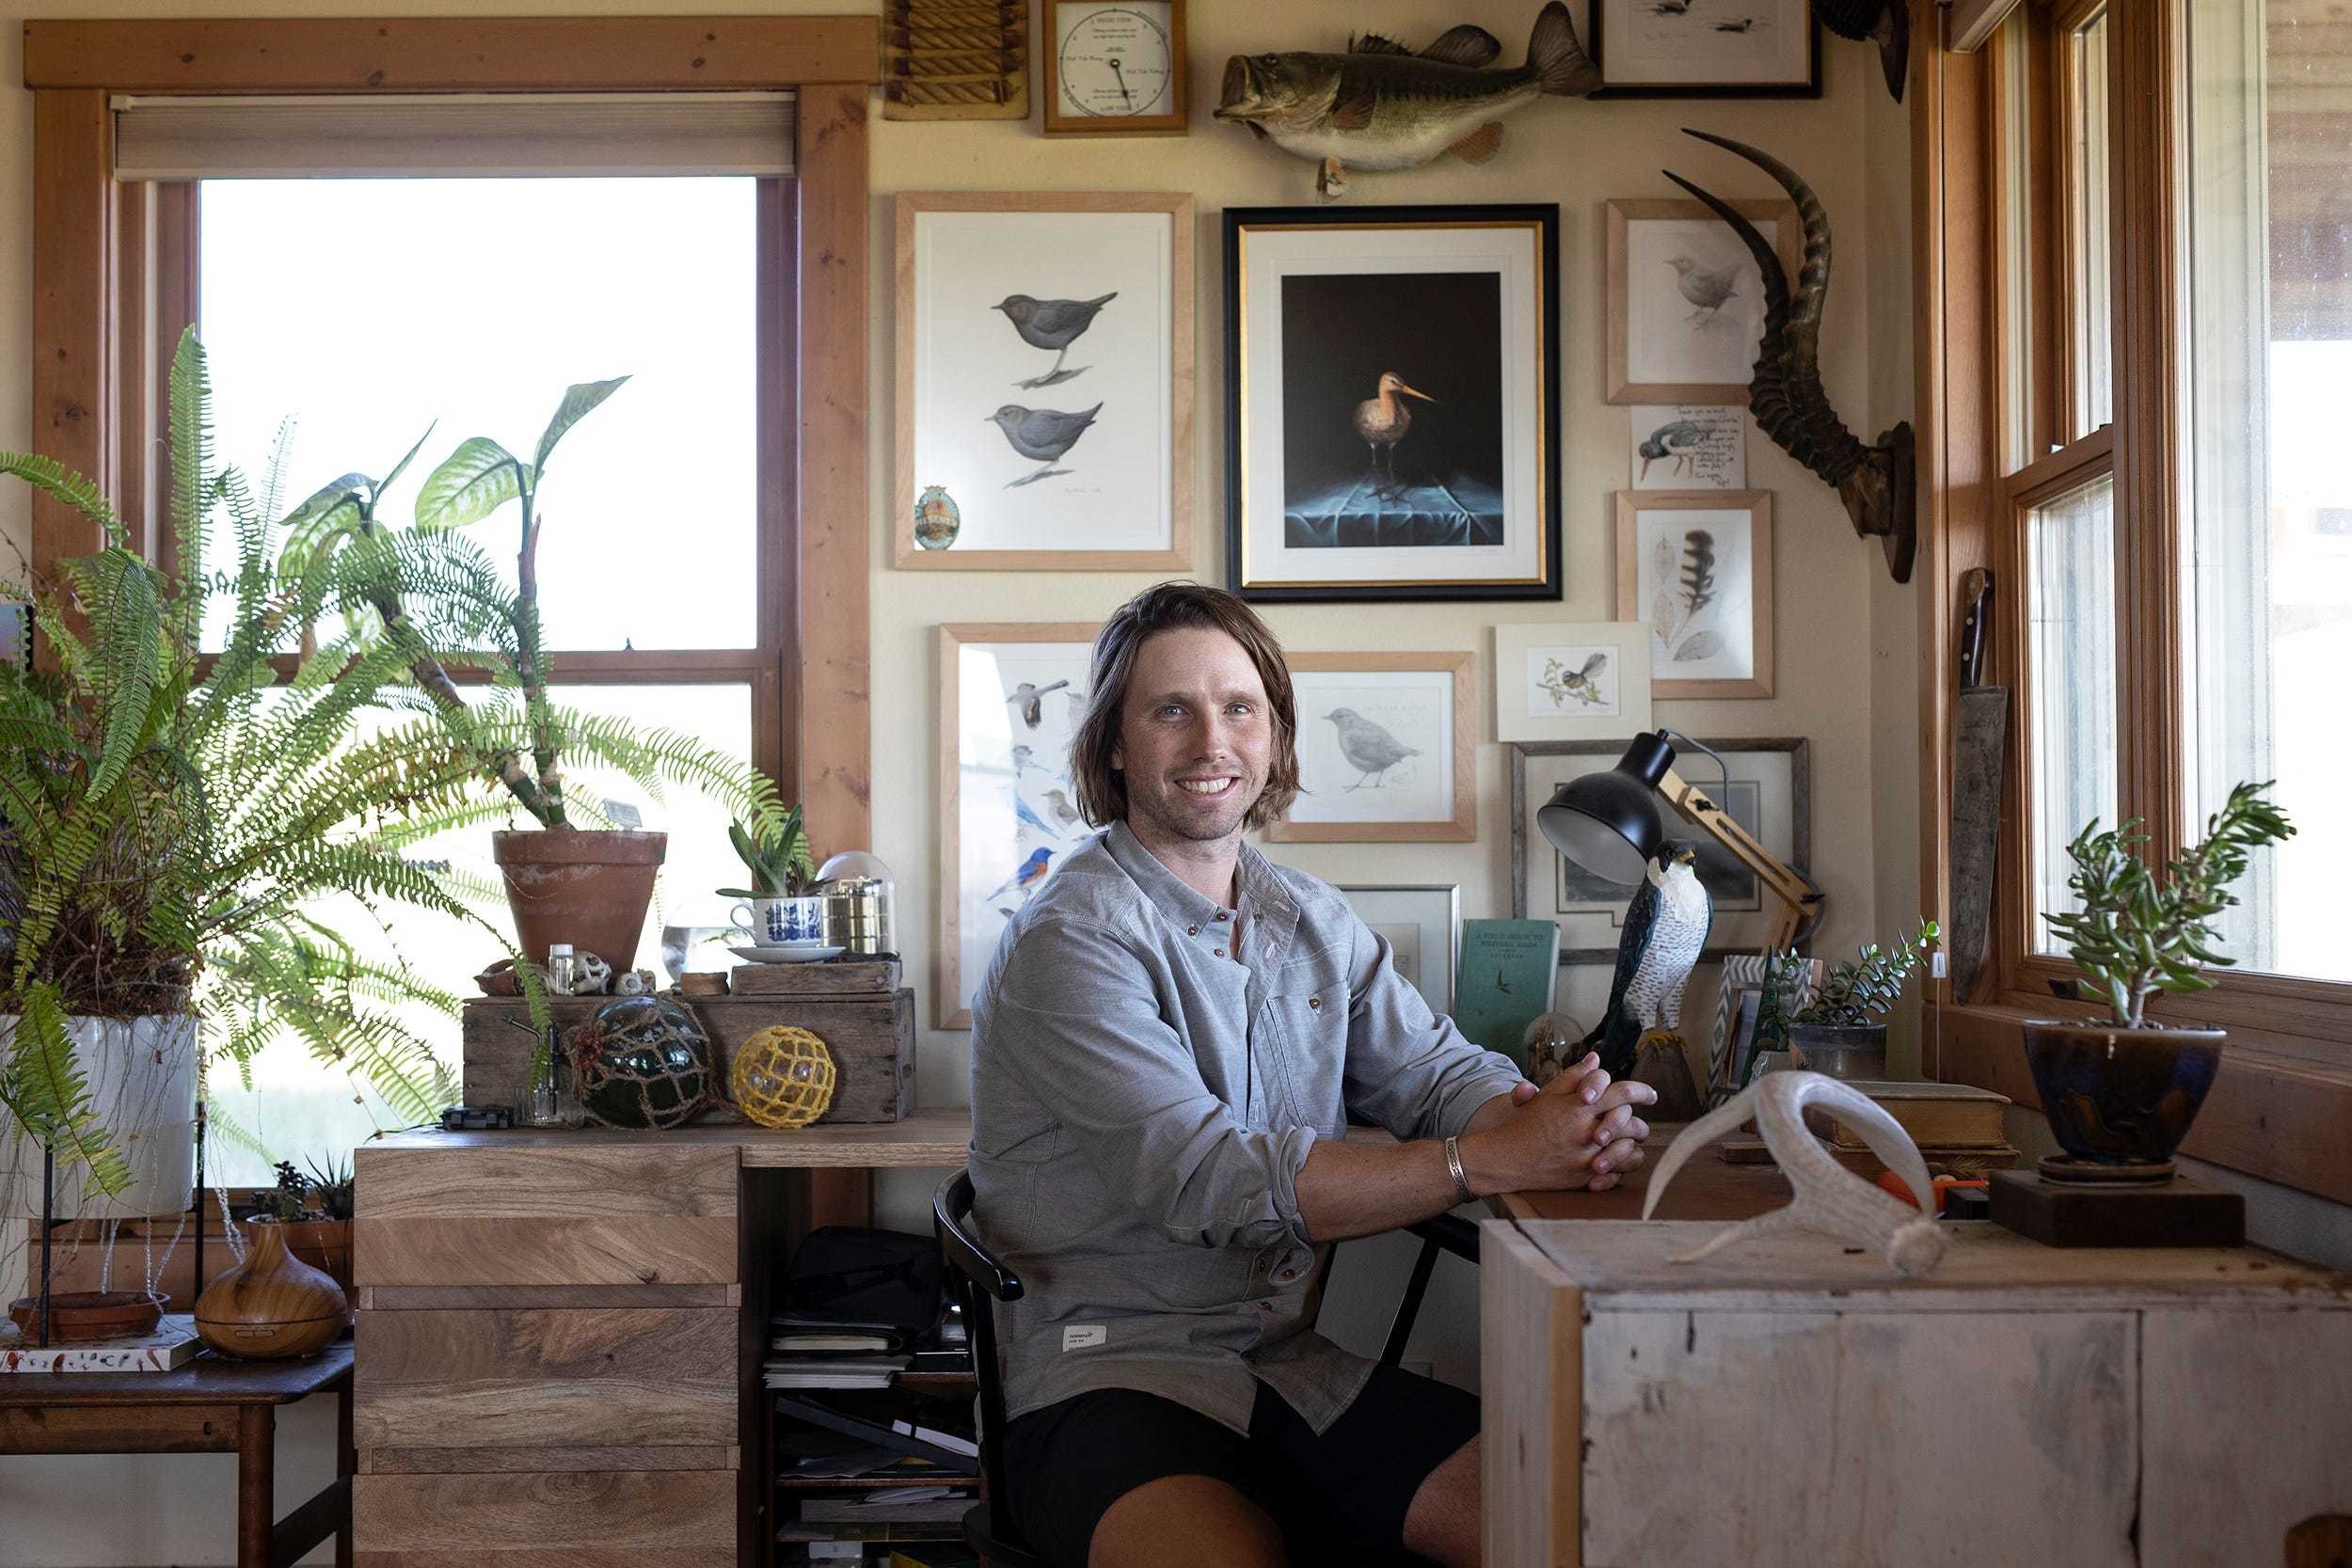 Ecologist Charles Post wears a gray button-up shirt while sitting in an office decorated with plants and pictures of birds.